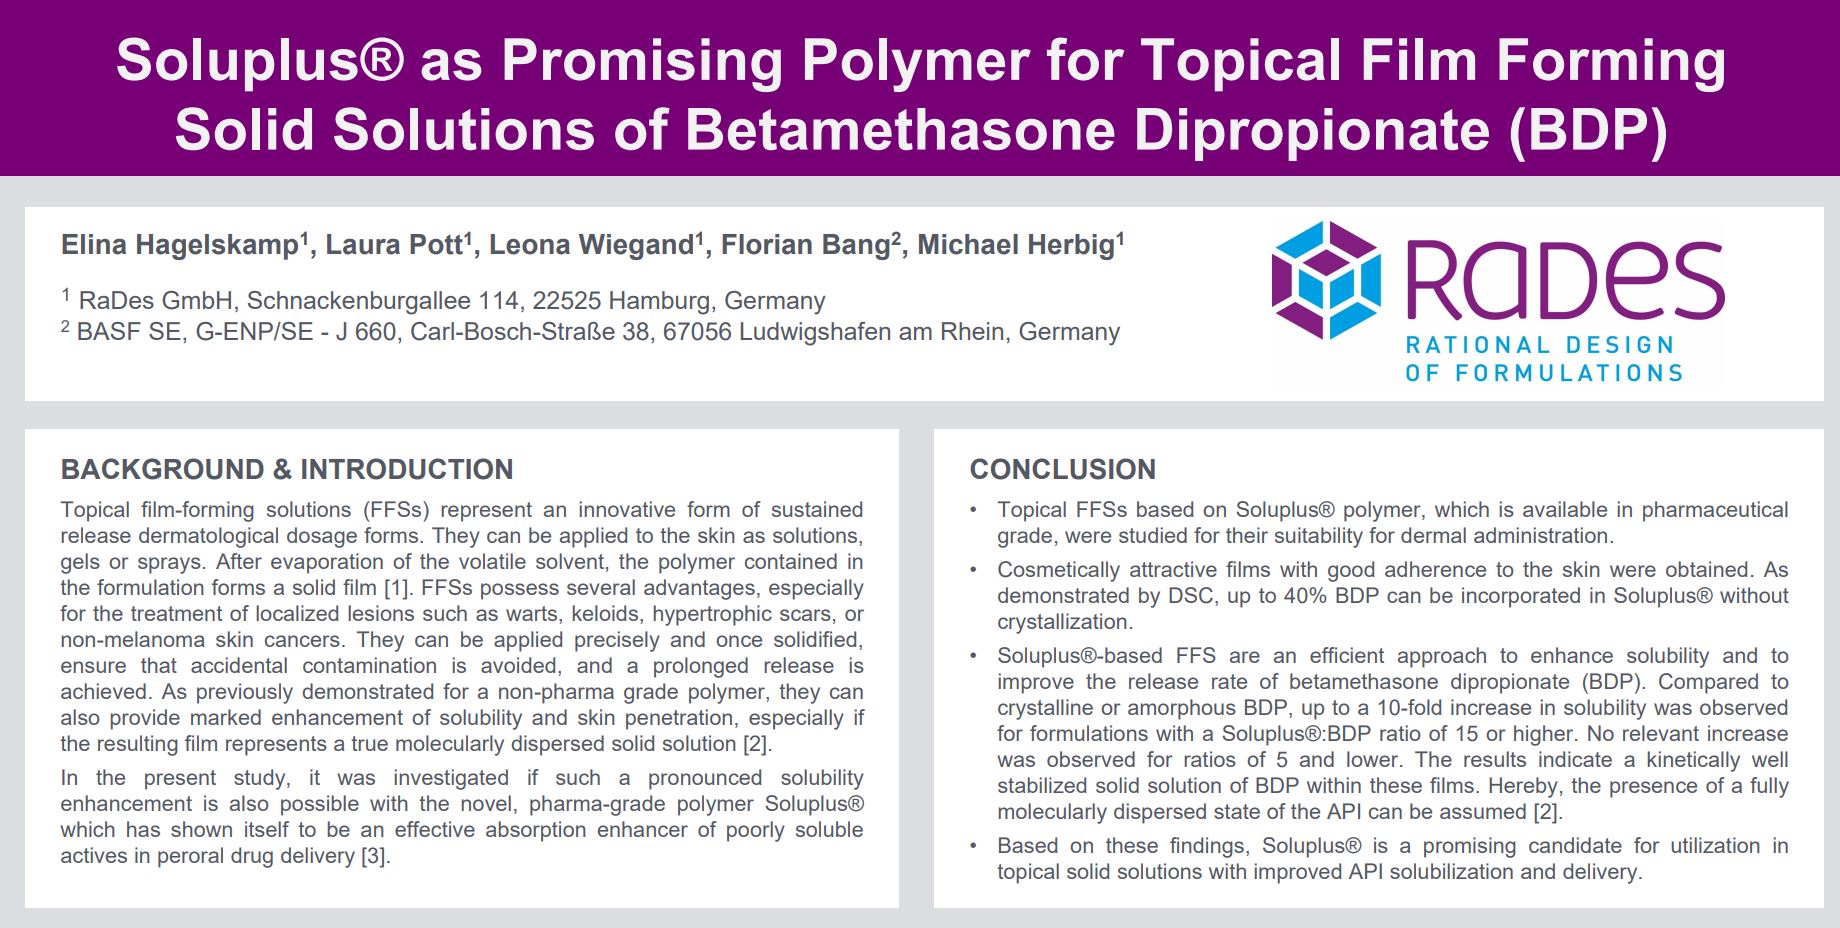 Soluplus® as Promising Polymer for Topical Film Forming Solid Solutions of Betamethasone Dipropionate (BDP)